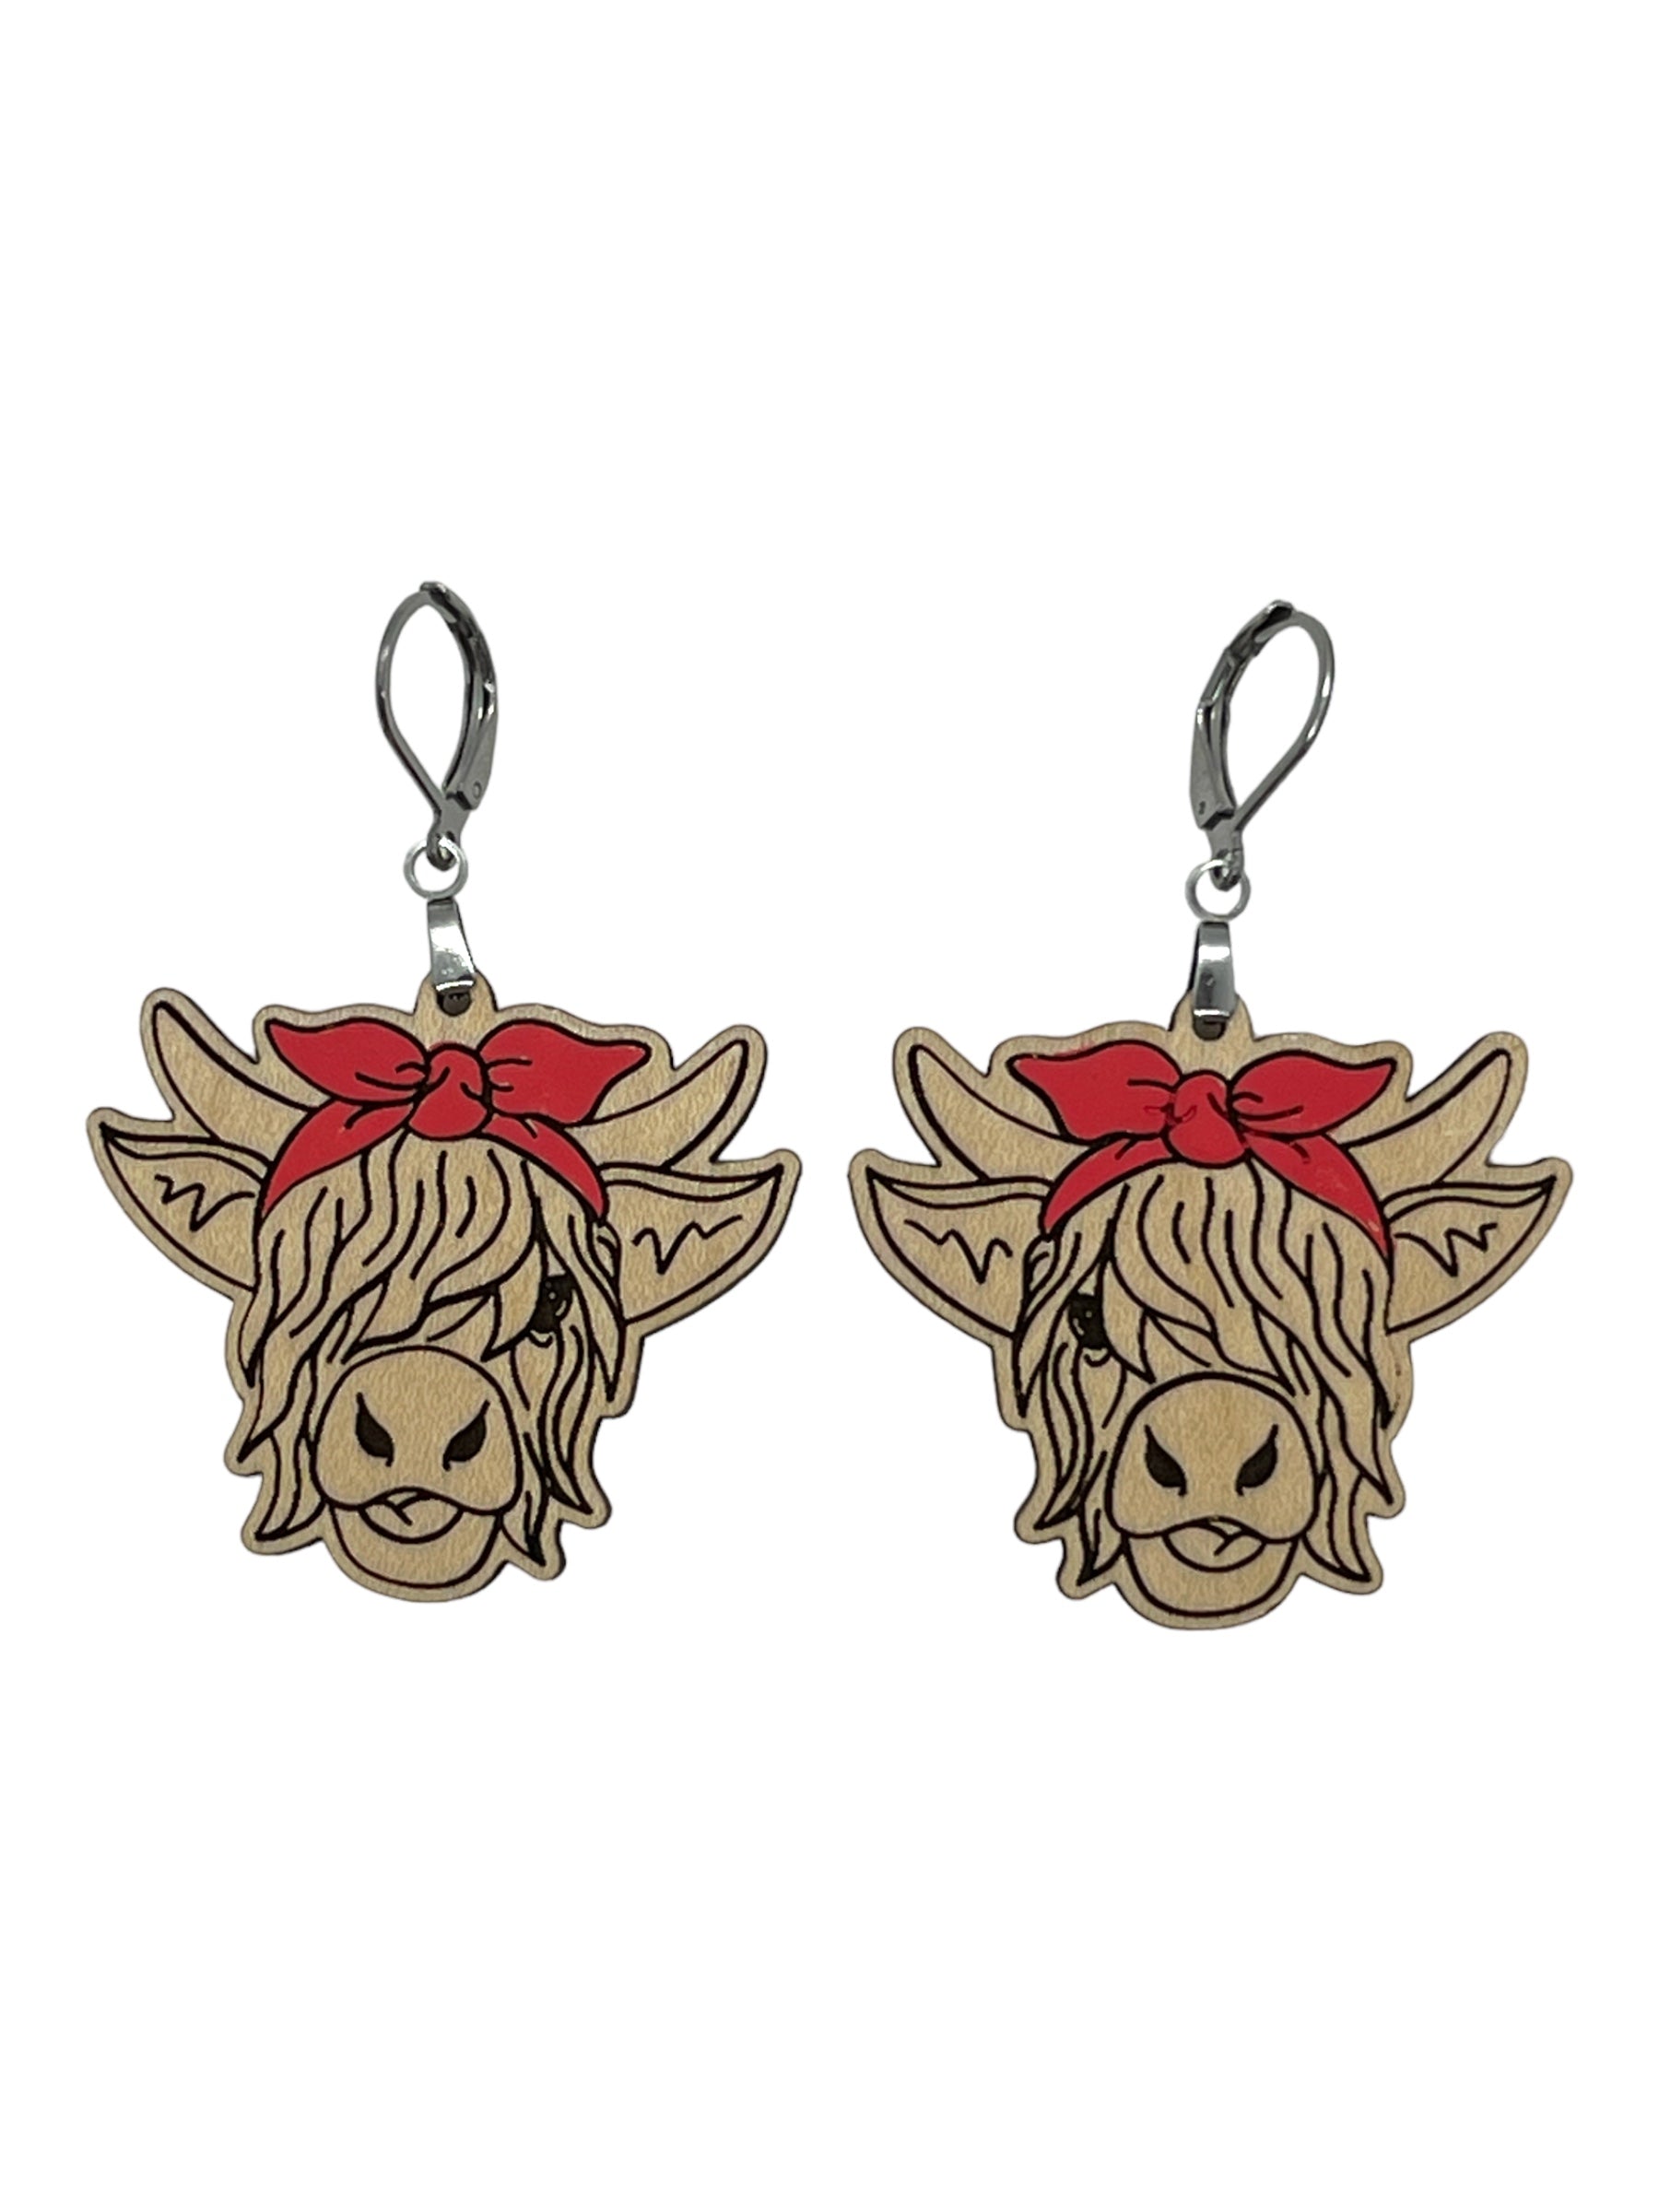 Highland Cow Earrings - Maple - Red Bow